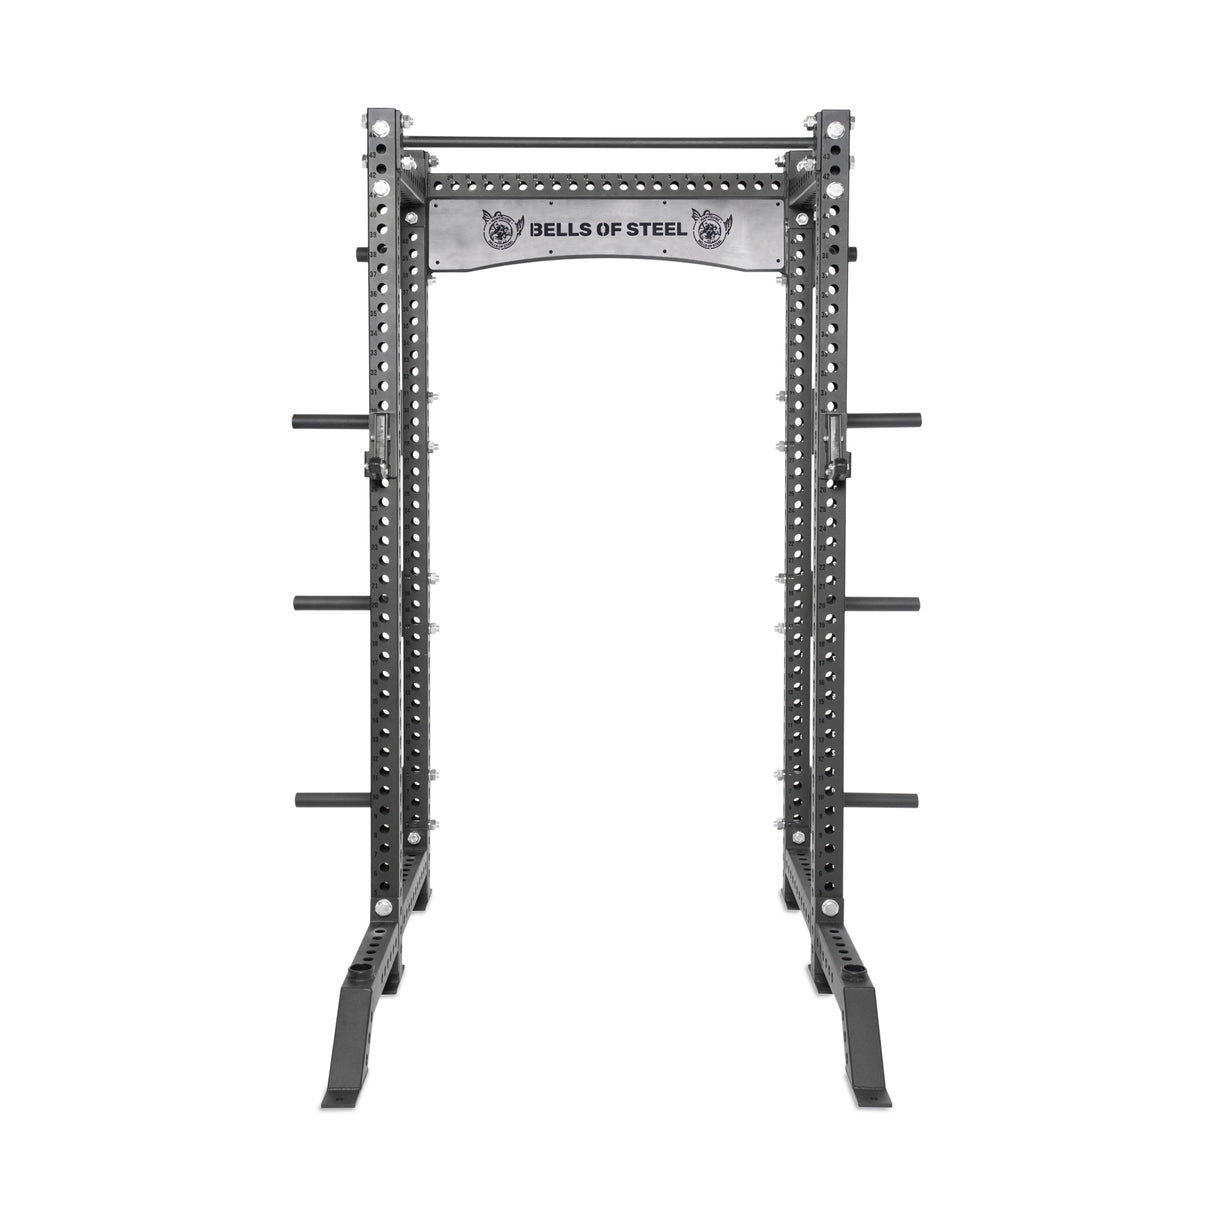 Product picture of Manticore Collegiate Power Rack PREBUILT front view